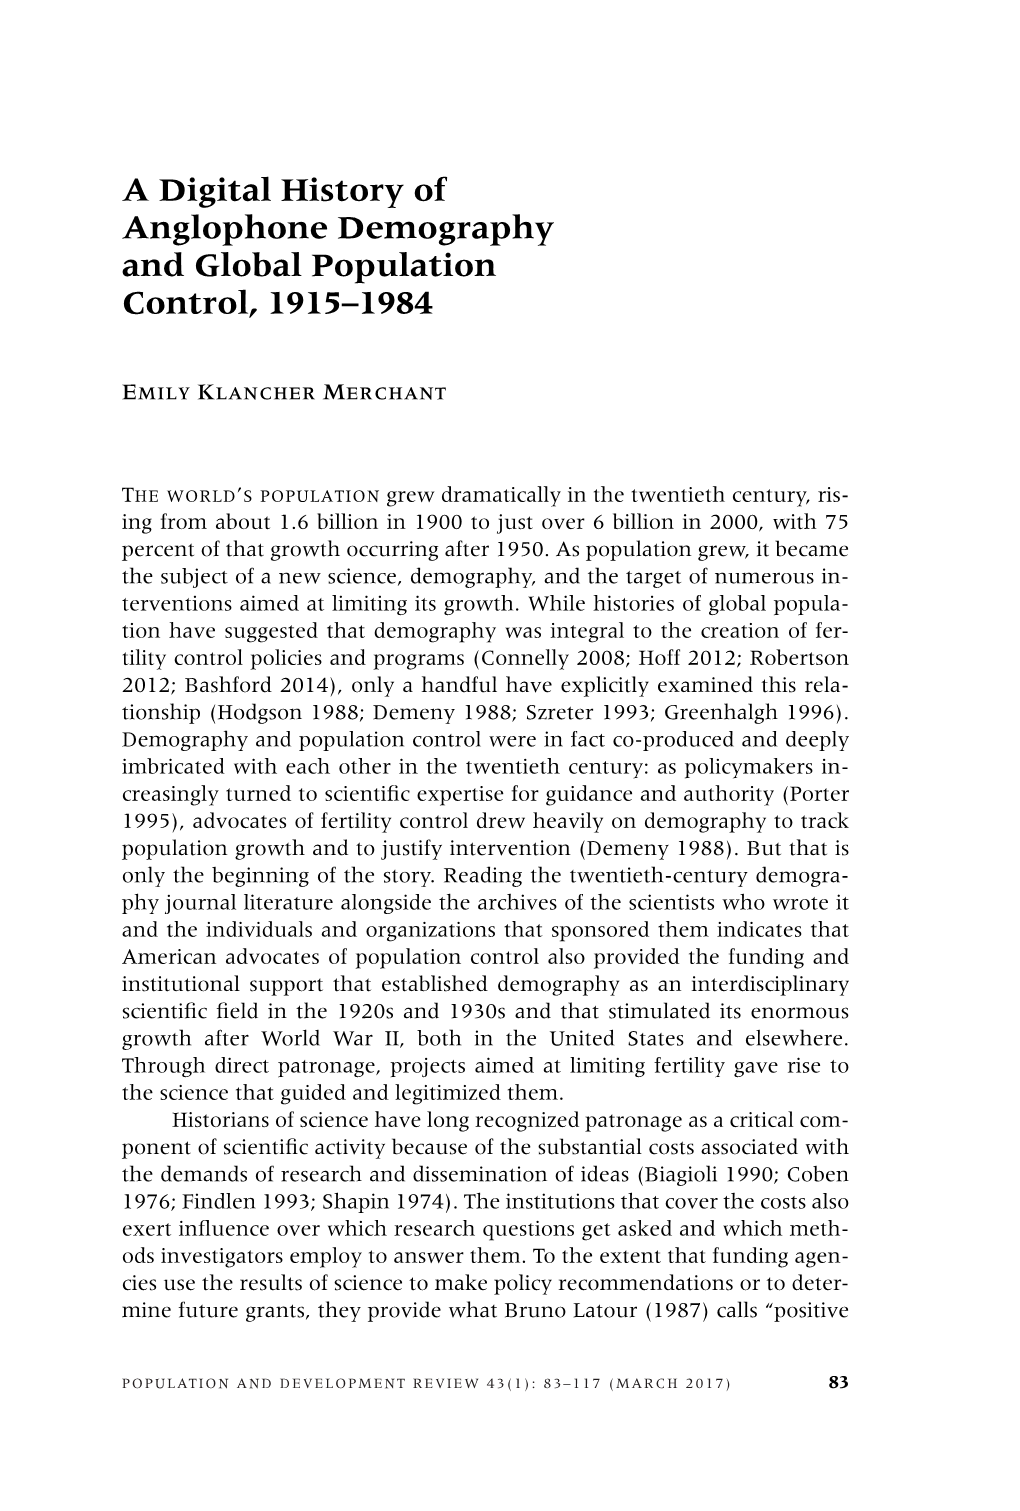 A Digital History of Anglophone Demography and Global Population Control, 1915–1984